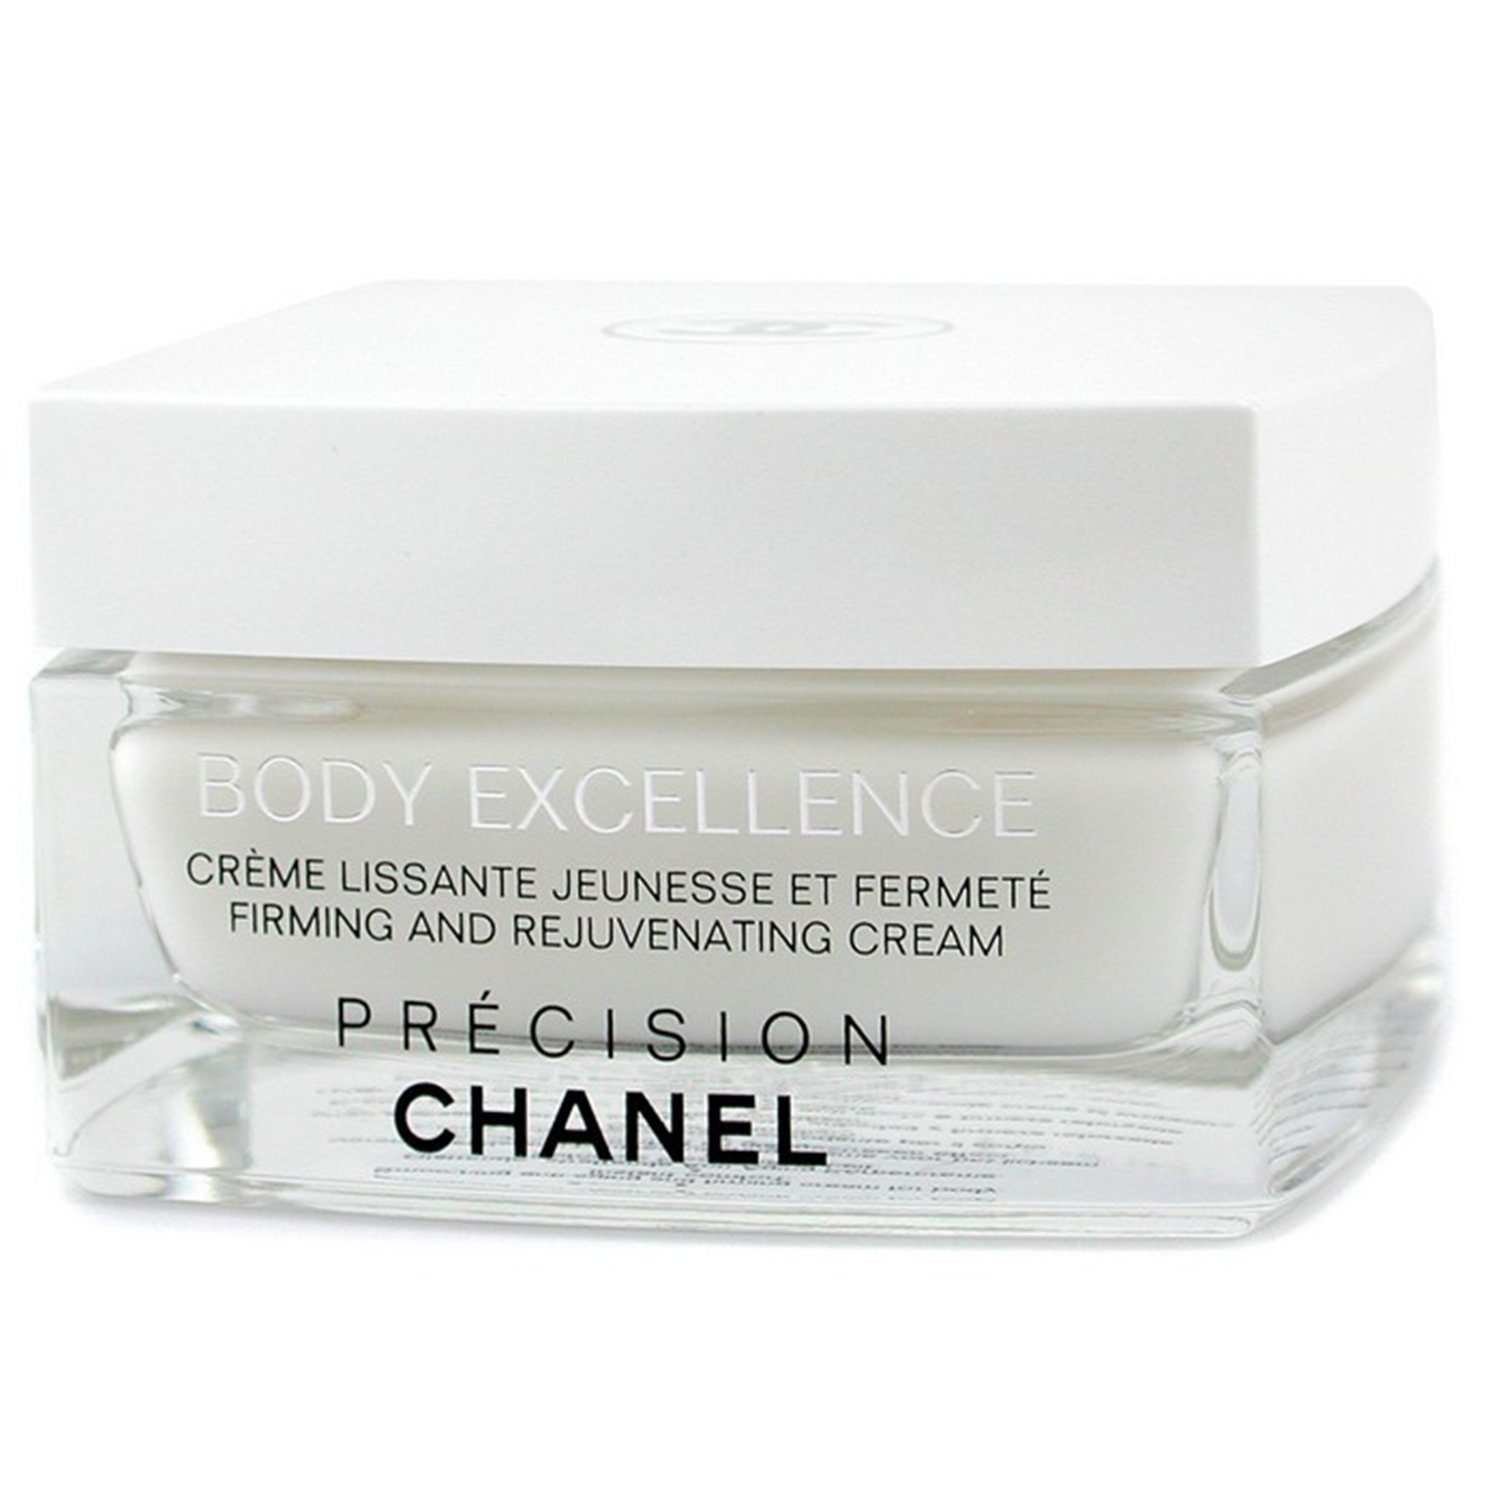 Body Excellence Firming & Rejuvenating Cream – Chanel